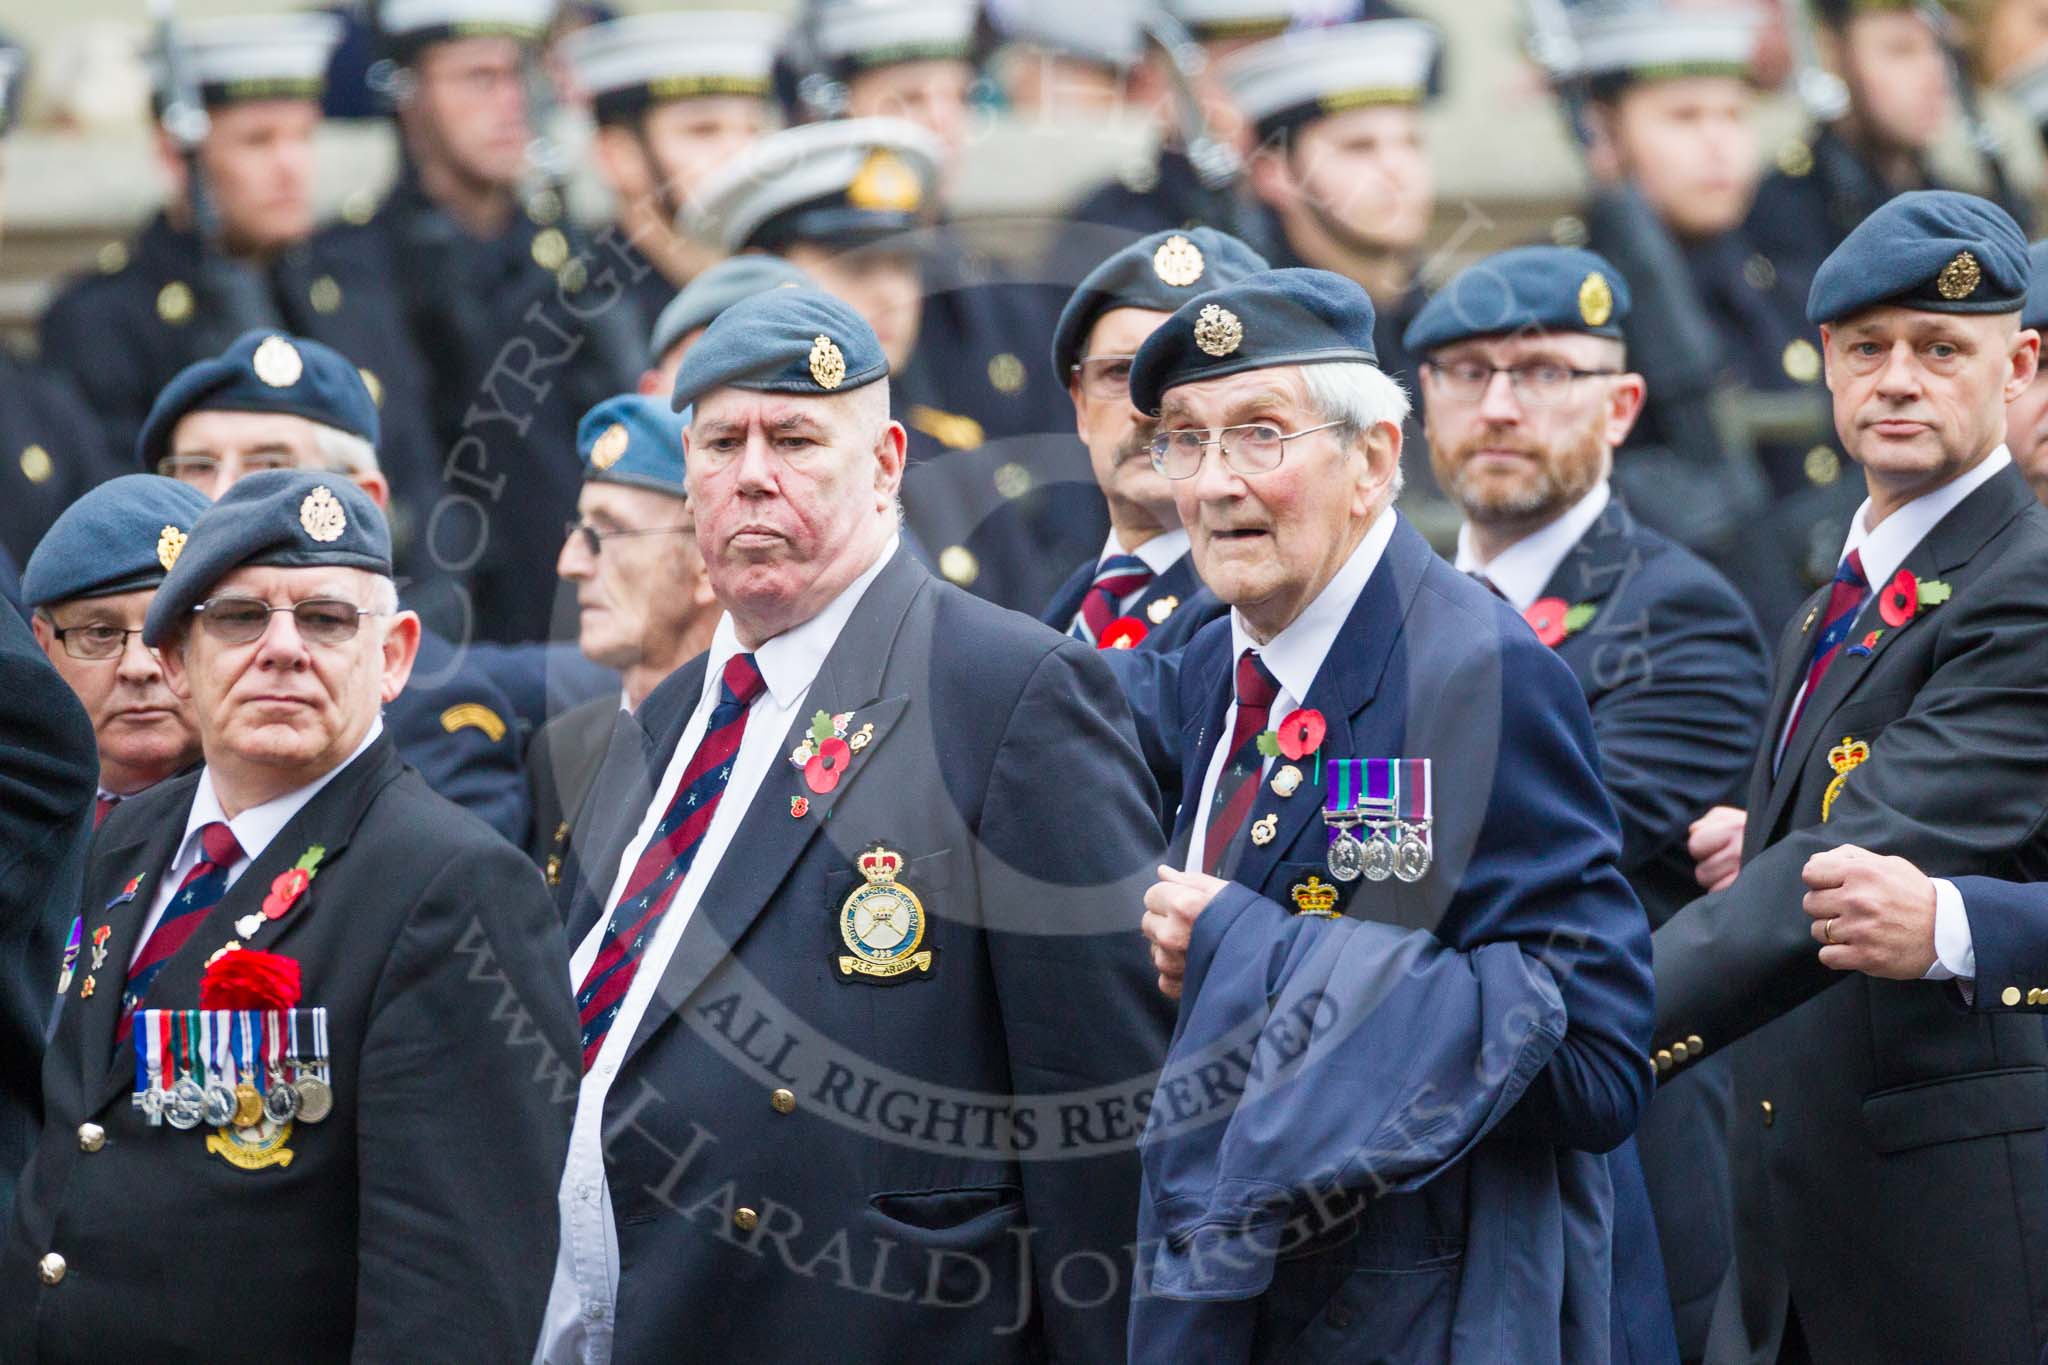 Remembrance Sunday at the Cenotaph 2015: C2, Royal Air Force Regiment Association.
Cenotaph, Whitehall, London SW1,
London,
Greater London,
United Kingdom,
on 08 November 2015 at 11:47, image #422